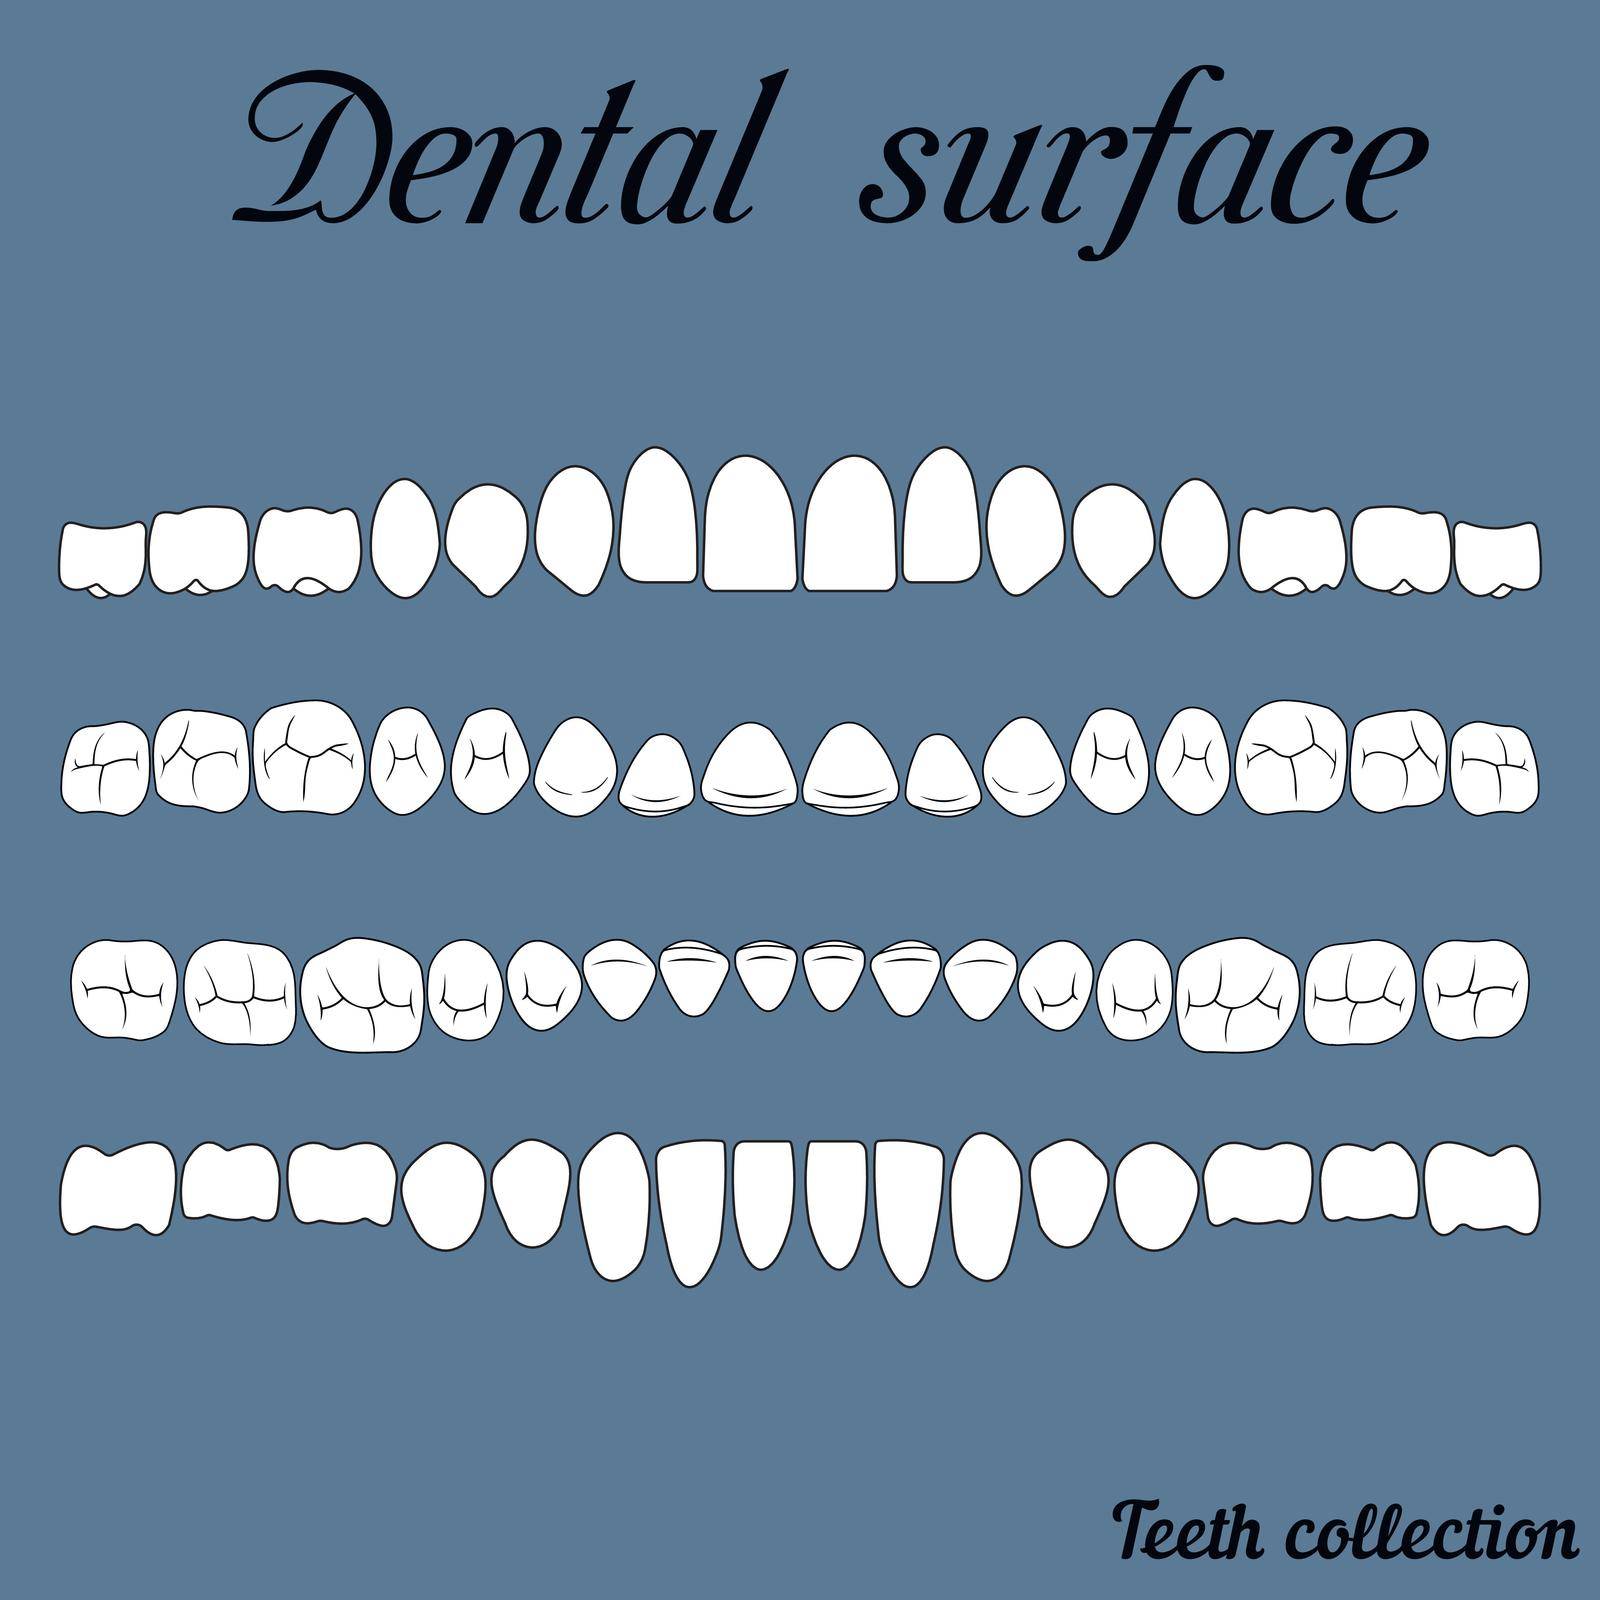 dental surface upper and lower jaw , the chewing surface of teeth incisor, canine, premolar, bikus, molar , wisdom tooth, in vector for print or design